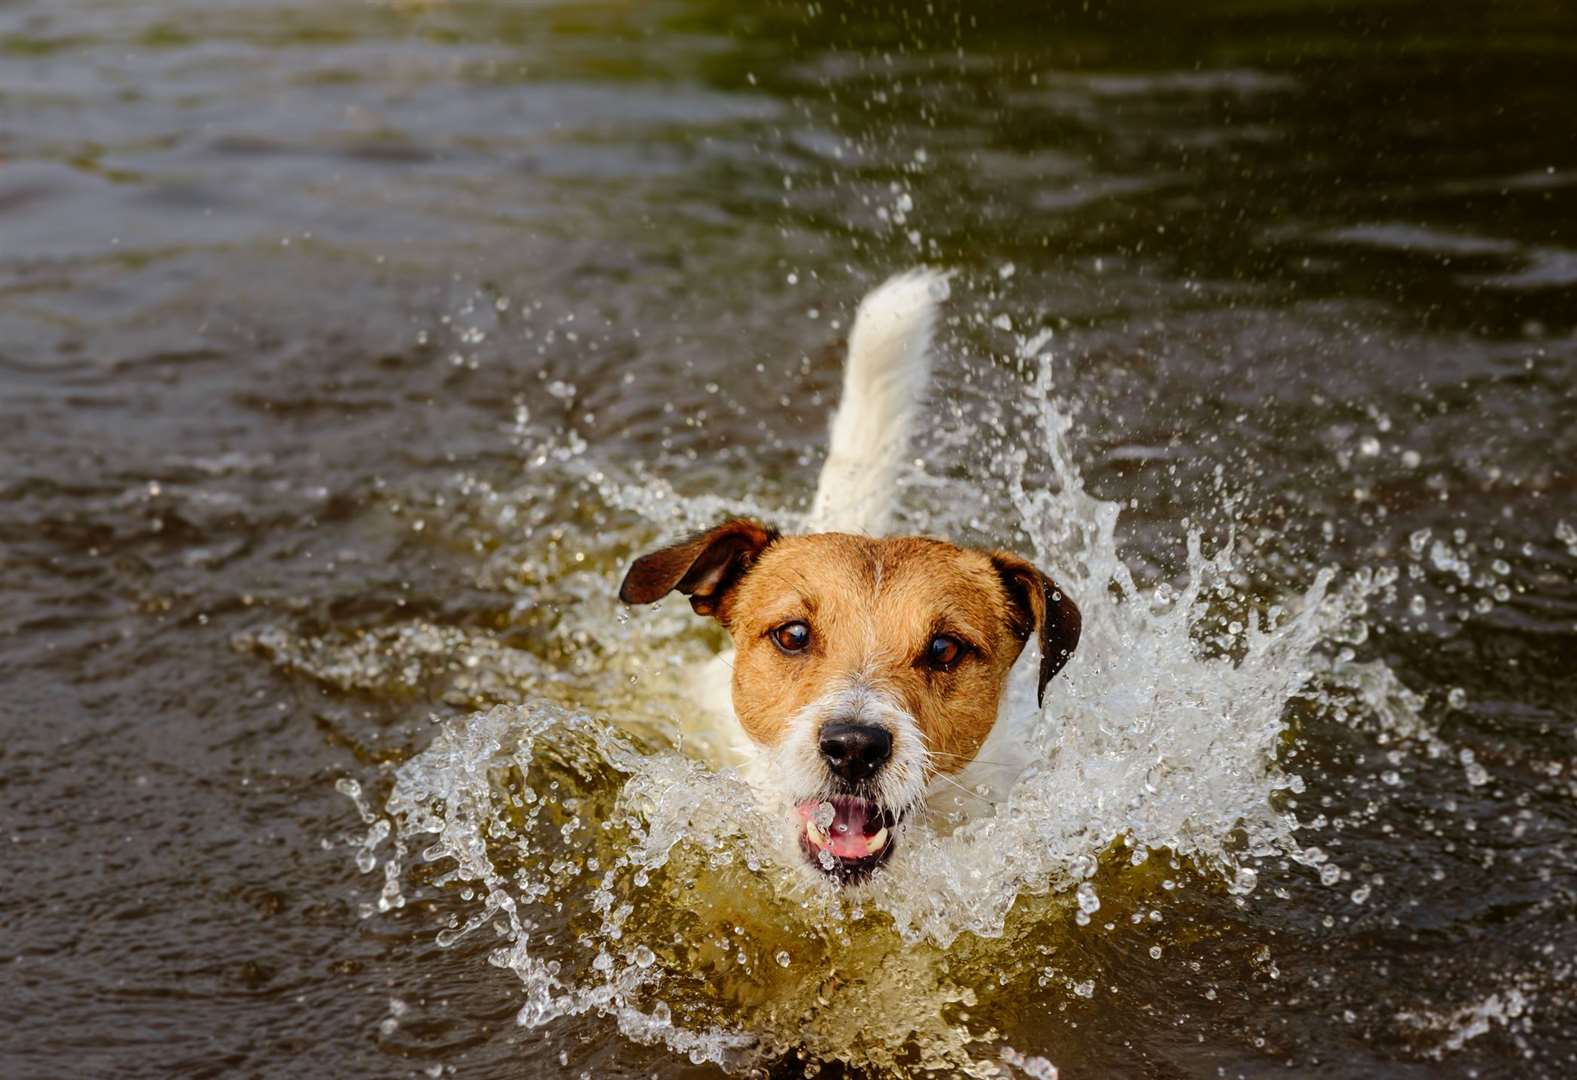 Dogs can ingest the poison when taking a swim in contaminated water. Picture: iStock.